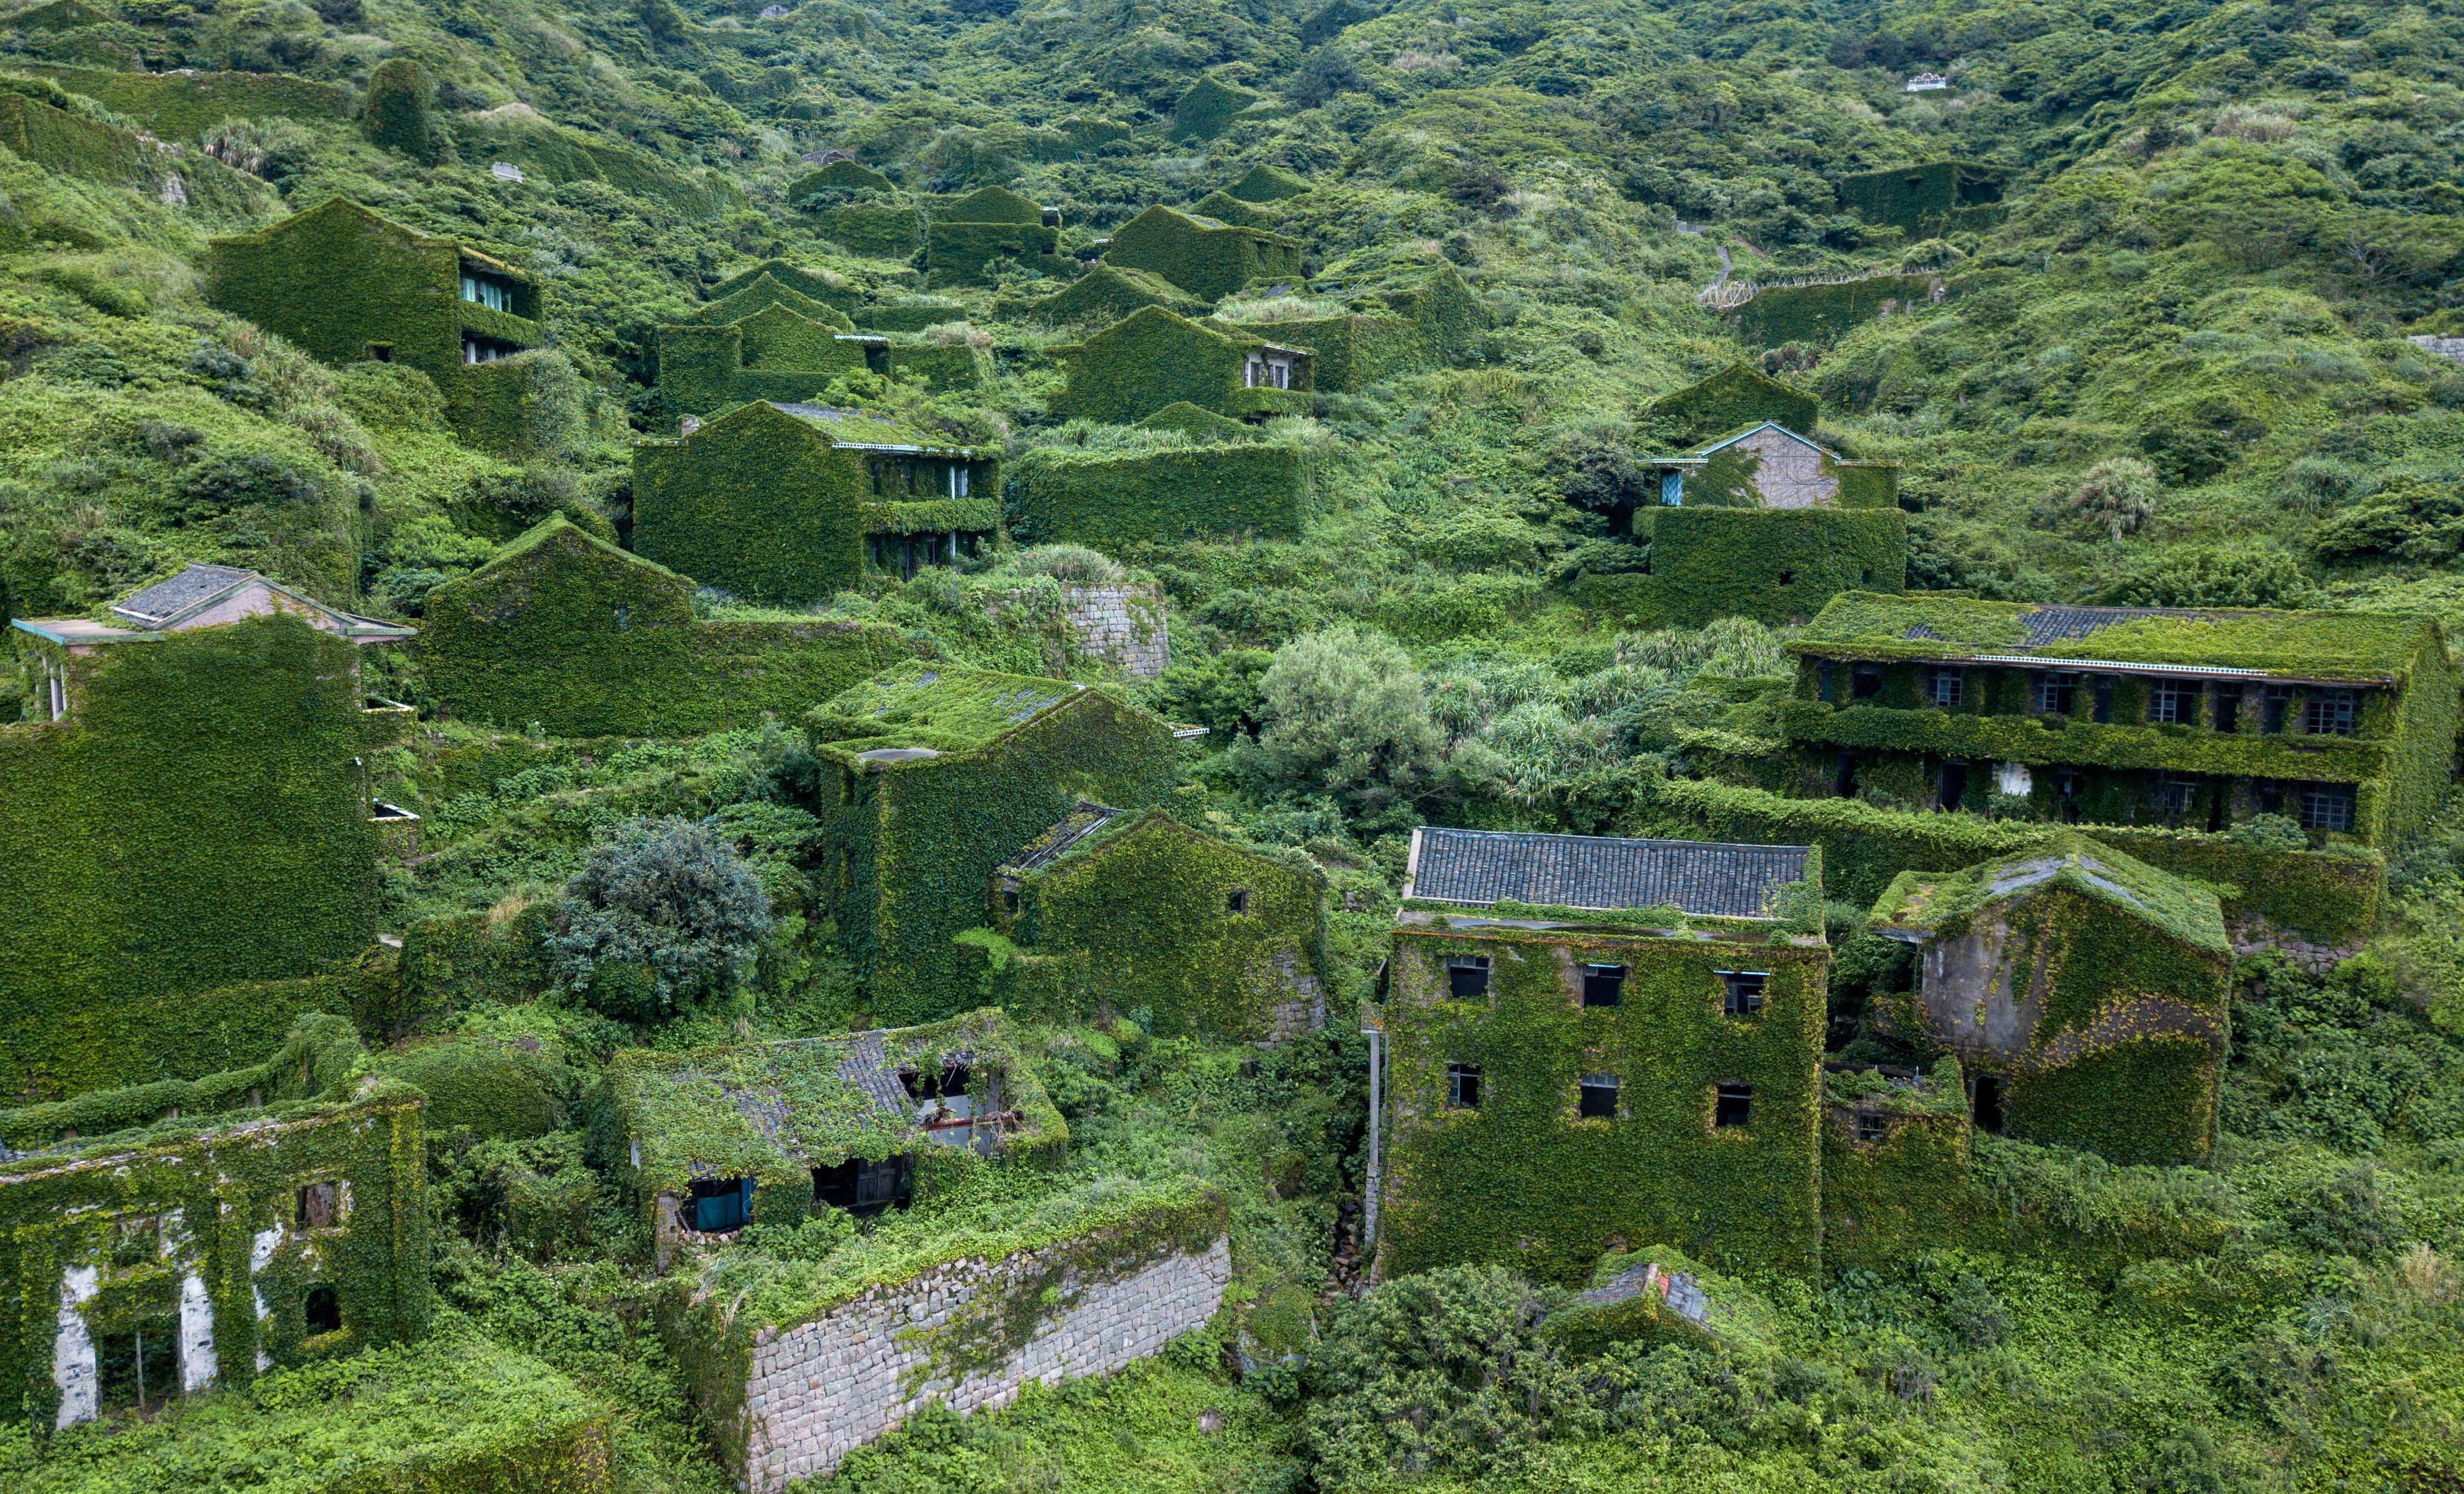 most beautiful abandoned places in the world